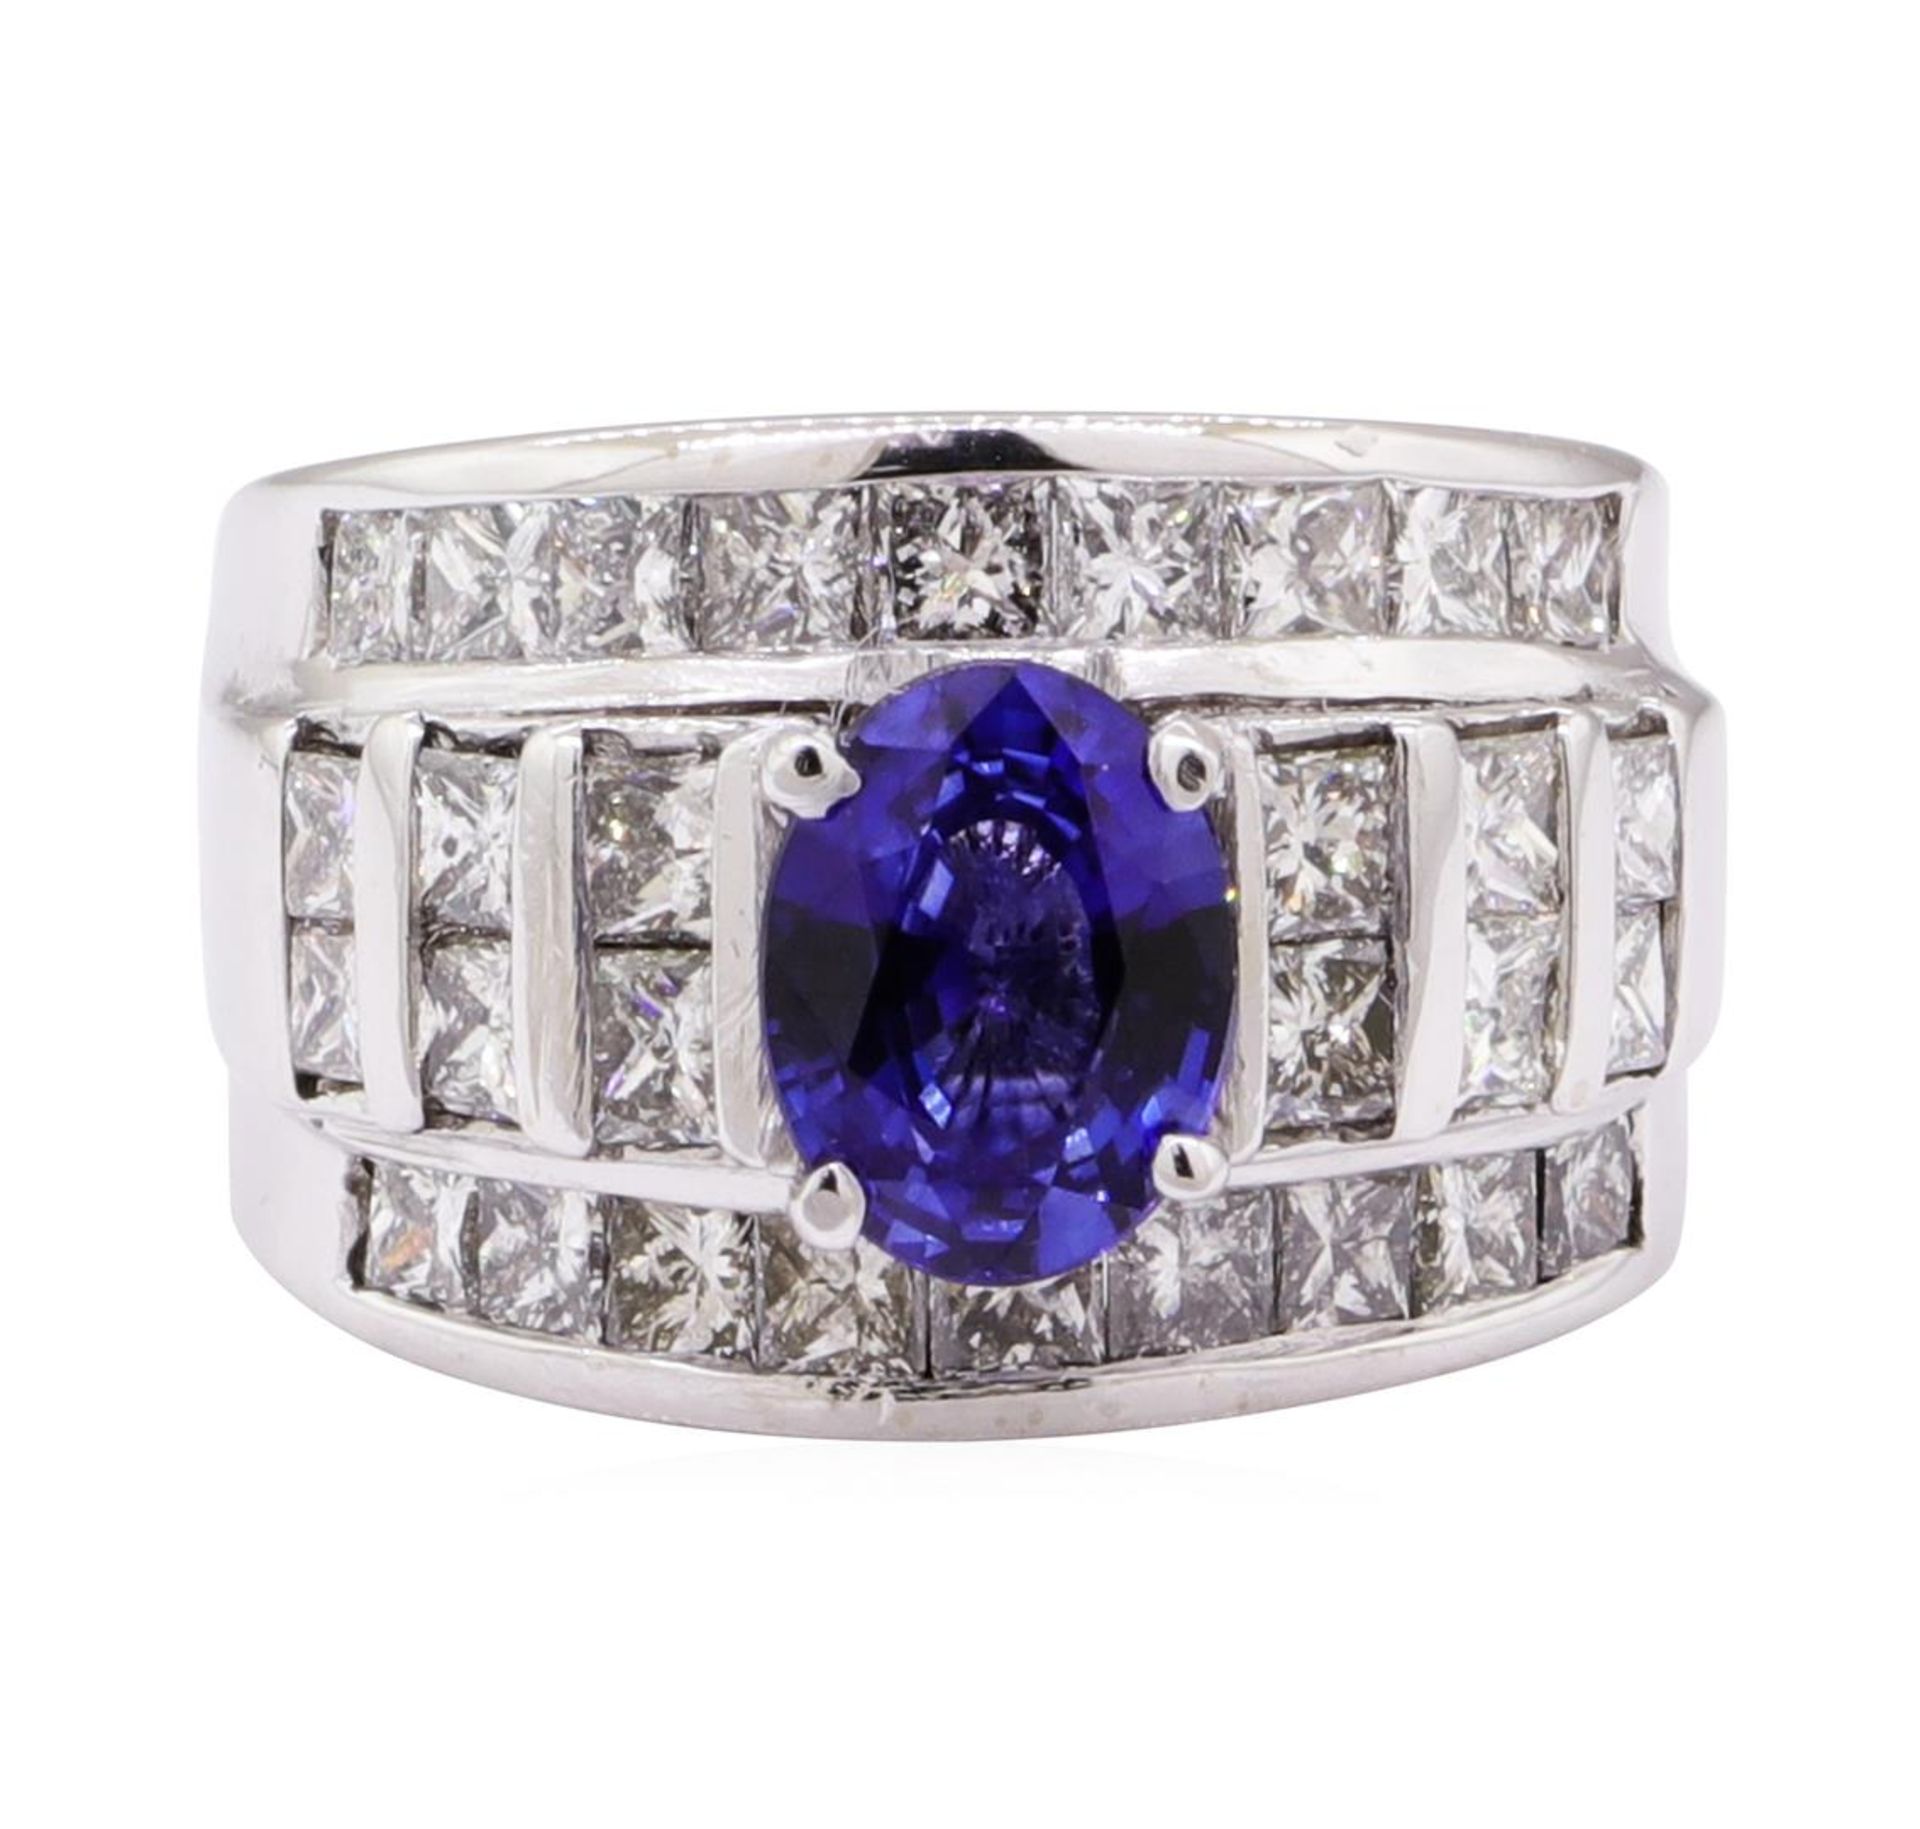 3.02 ctw Sapphire And Diamond Ring - 14KT White Gold - Image 2 of 5